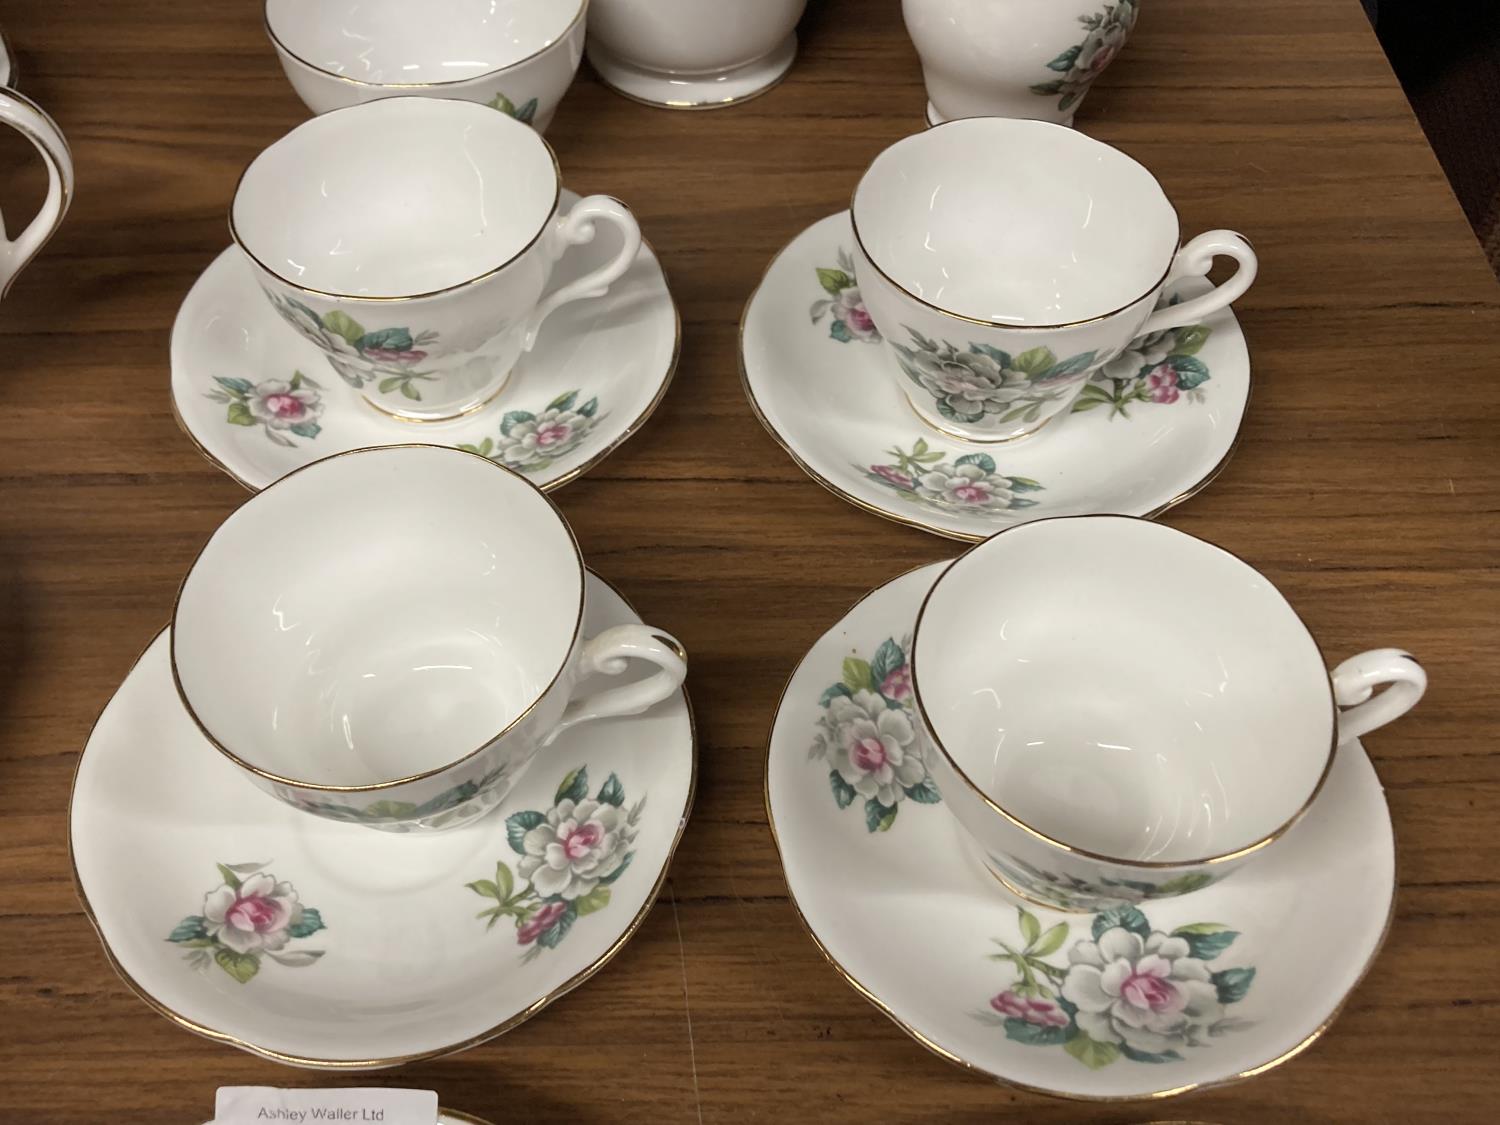 A BONE CHINA COFFEE SET WITH FLORAL DECORATION TO INCLUDE COFFEE SET, CREAM JUG, SUGAR BOWL, CUPS - Image 3 of 6